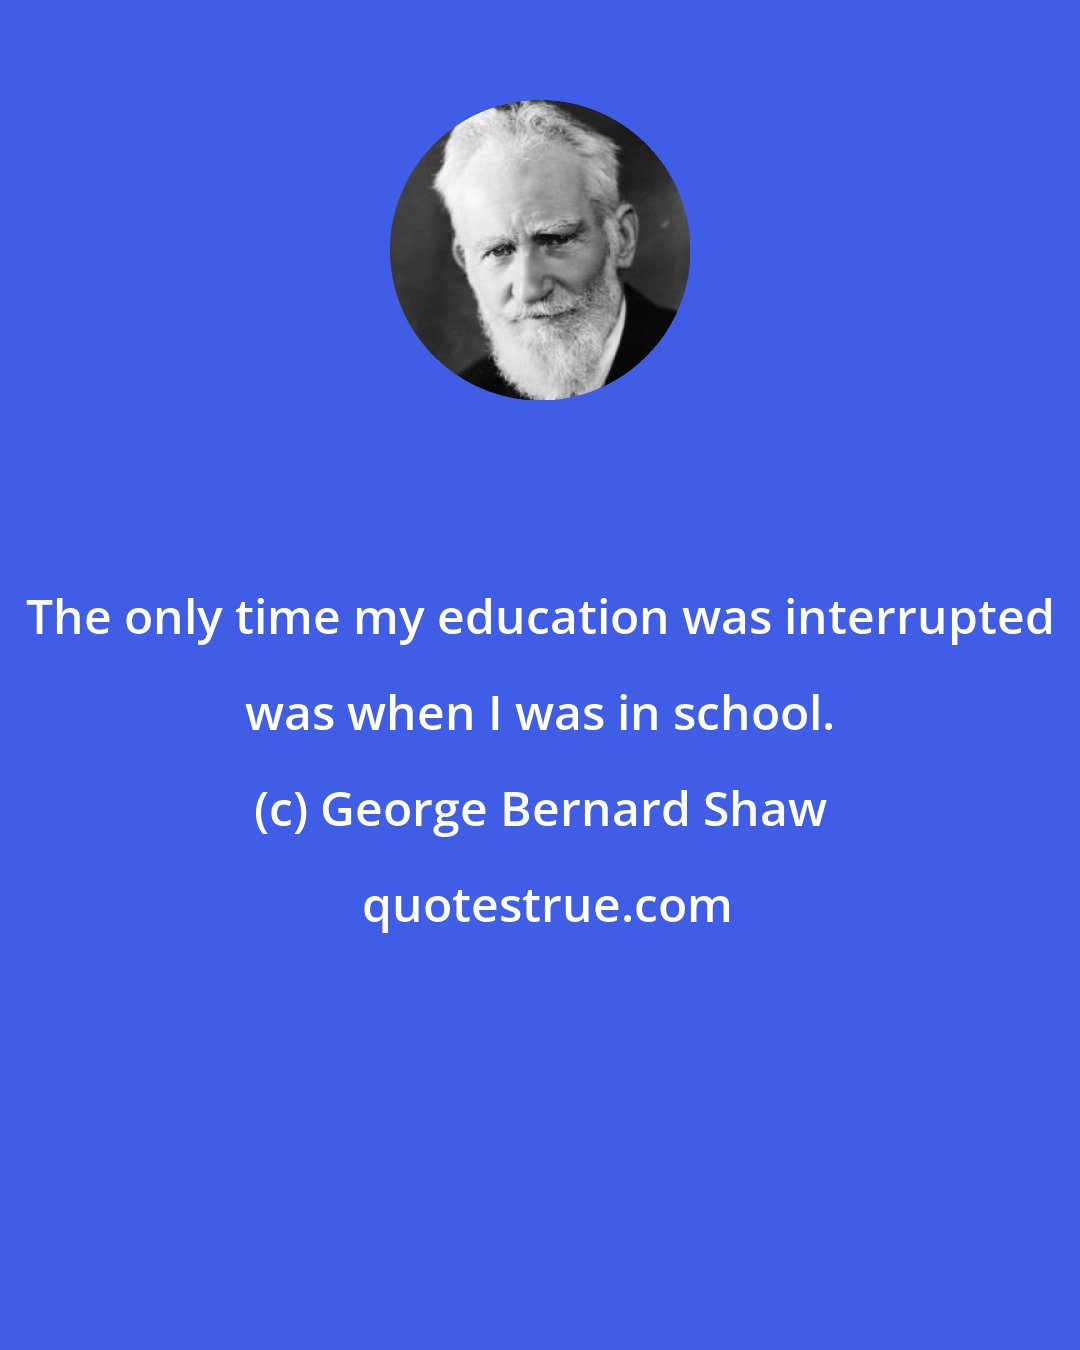 George Bernard Shaw: The only time my education was interrupted was when I was in school.